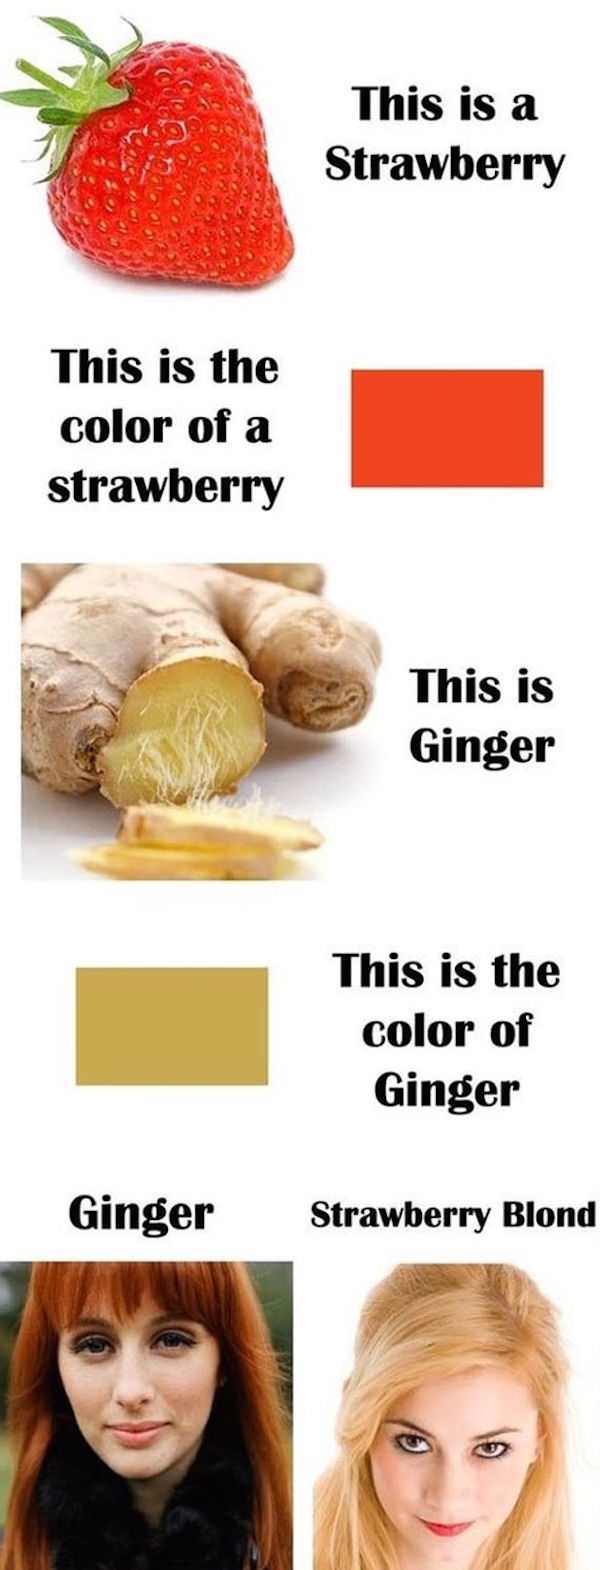 funny pic of strawberry blond vs ginger